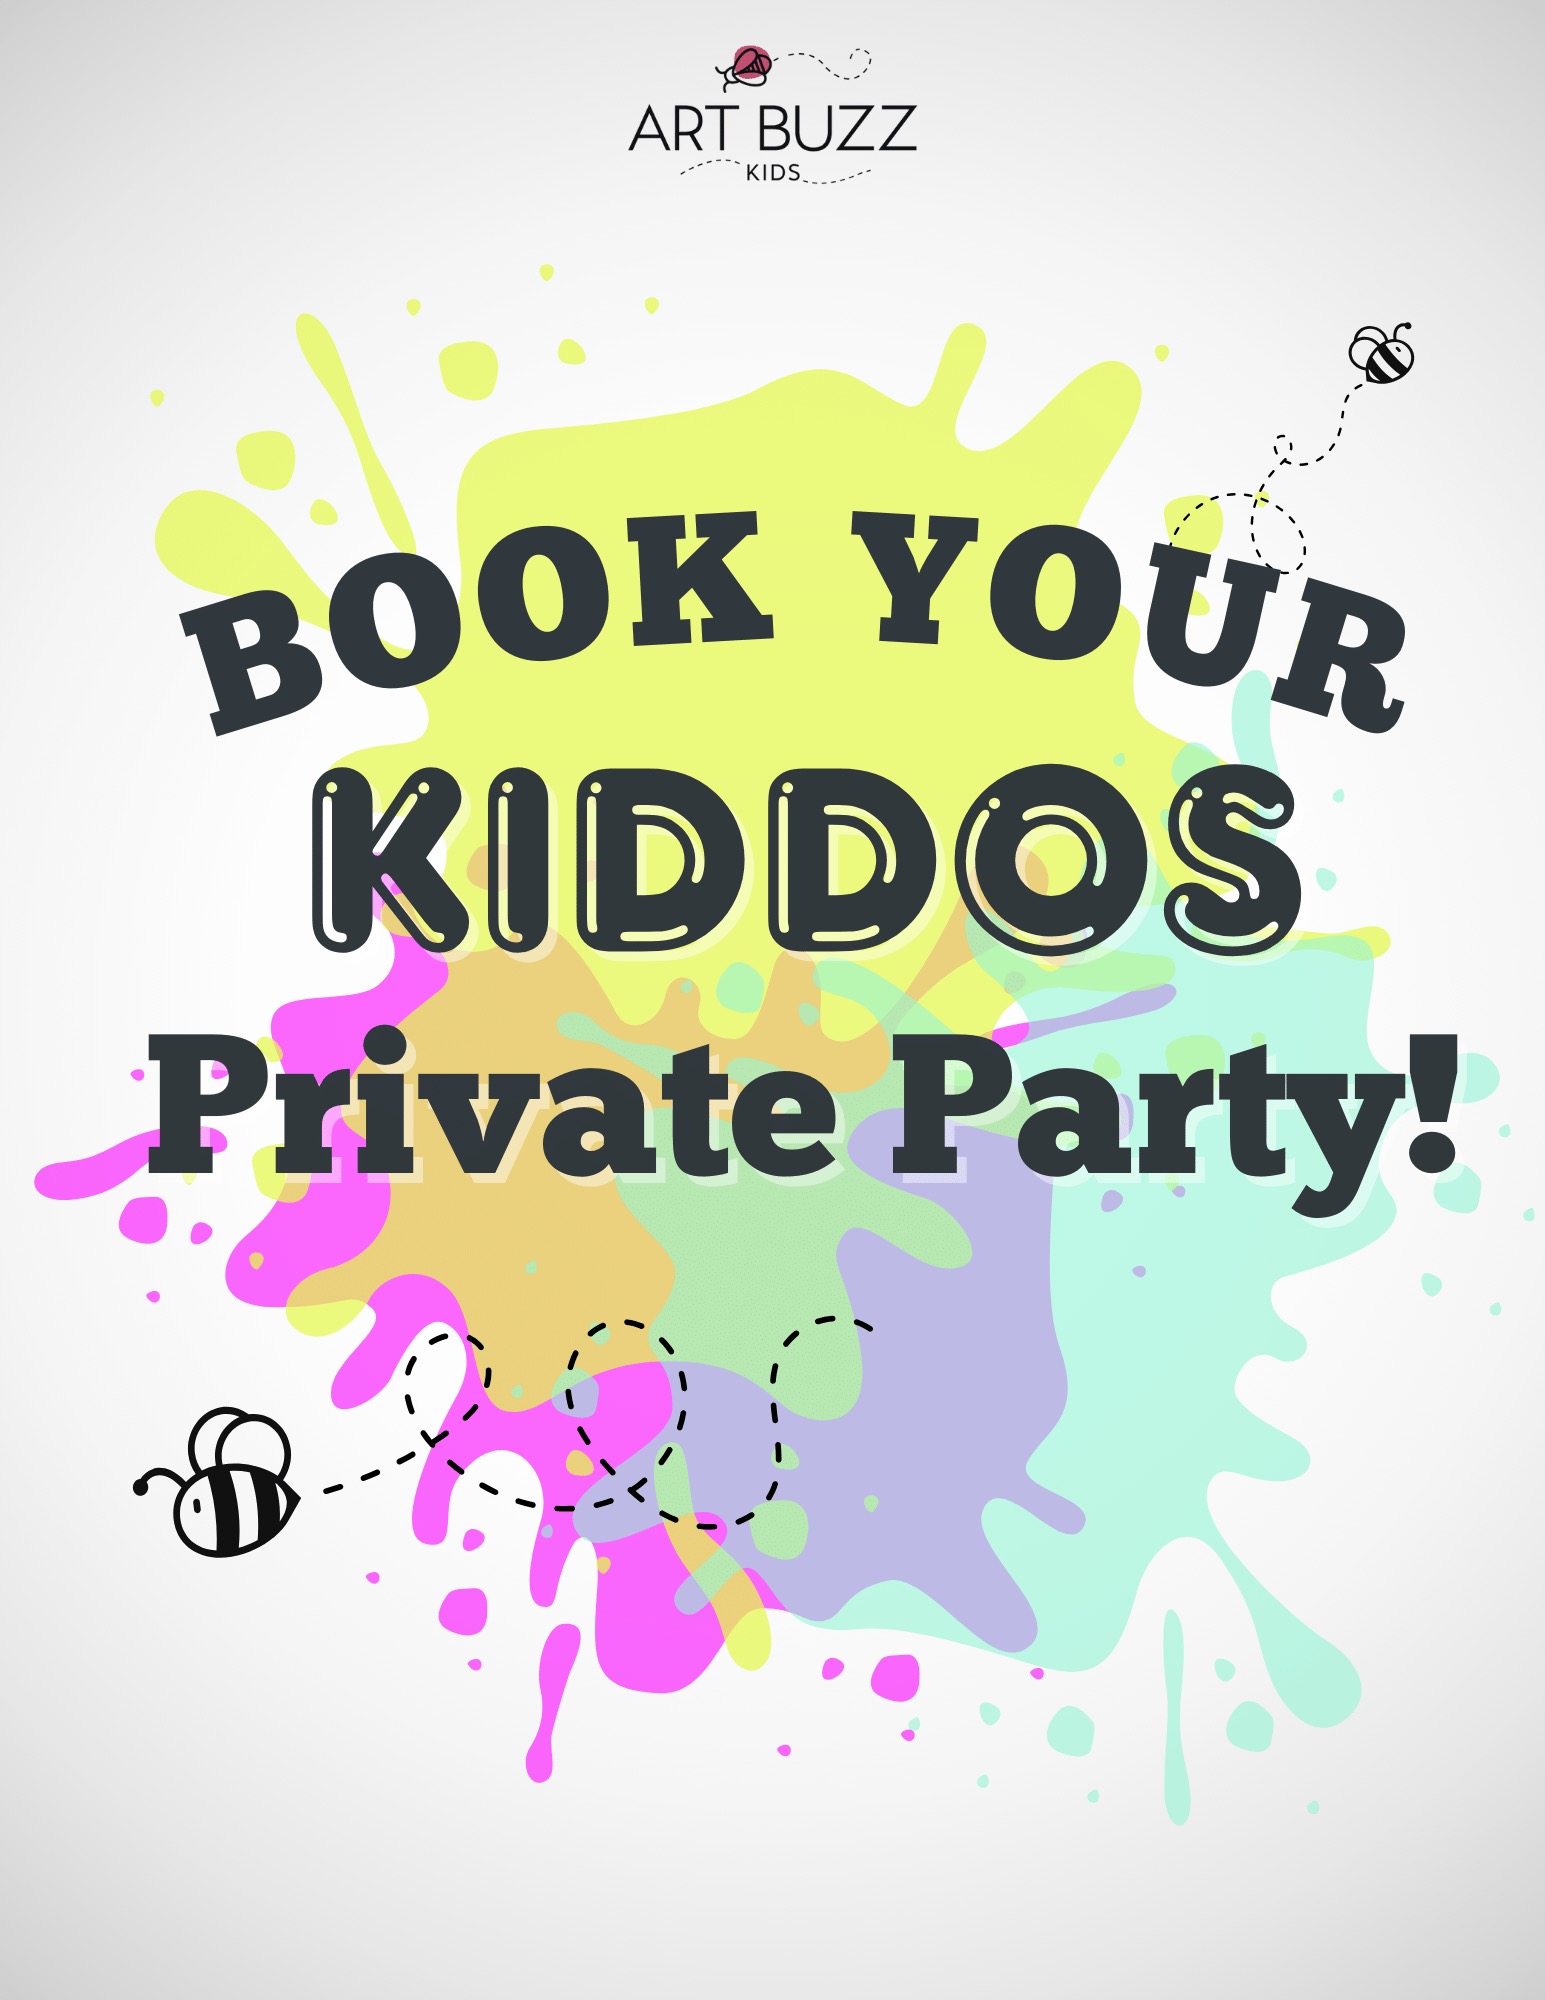 BOOK YOUR KIDDOS PRIVATE PAINT PARTY TODAY! (10 Guest Minimum)